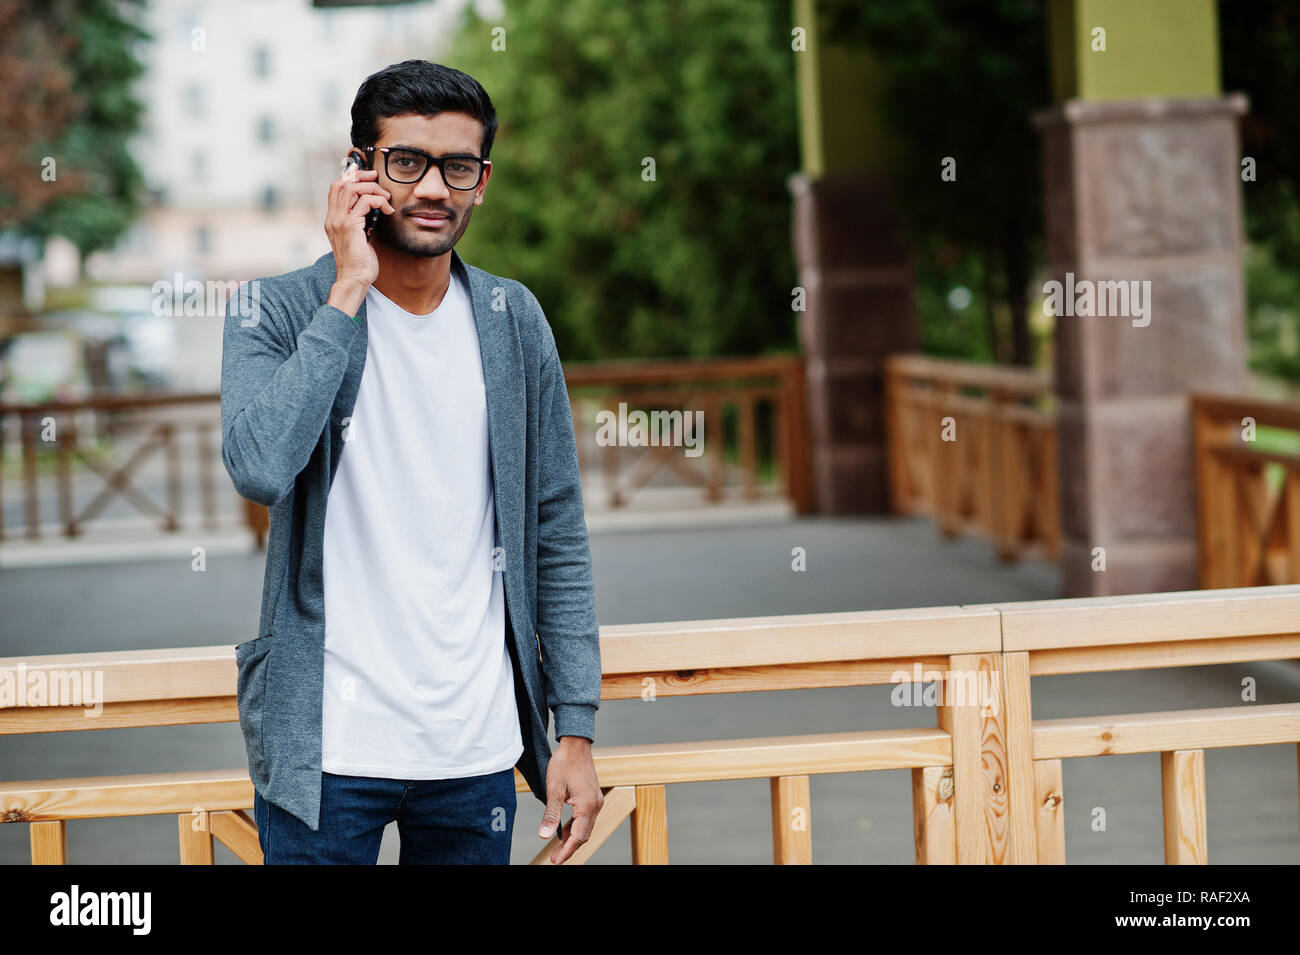 Stylish indian man at glasses wear casual posed outdoor and speaking on phone. Stock Photo